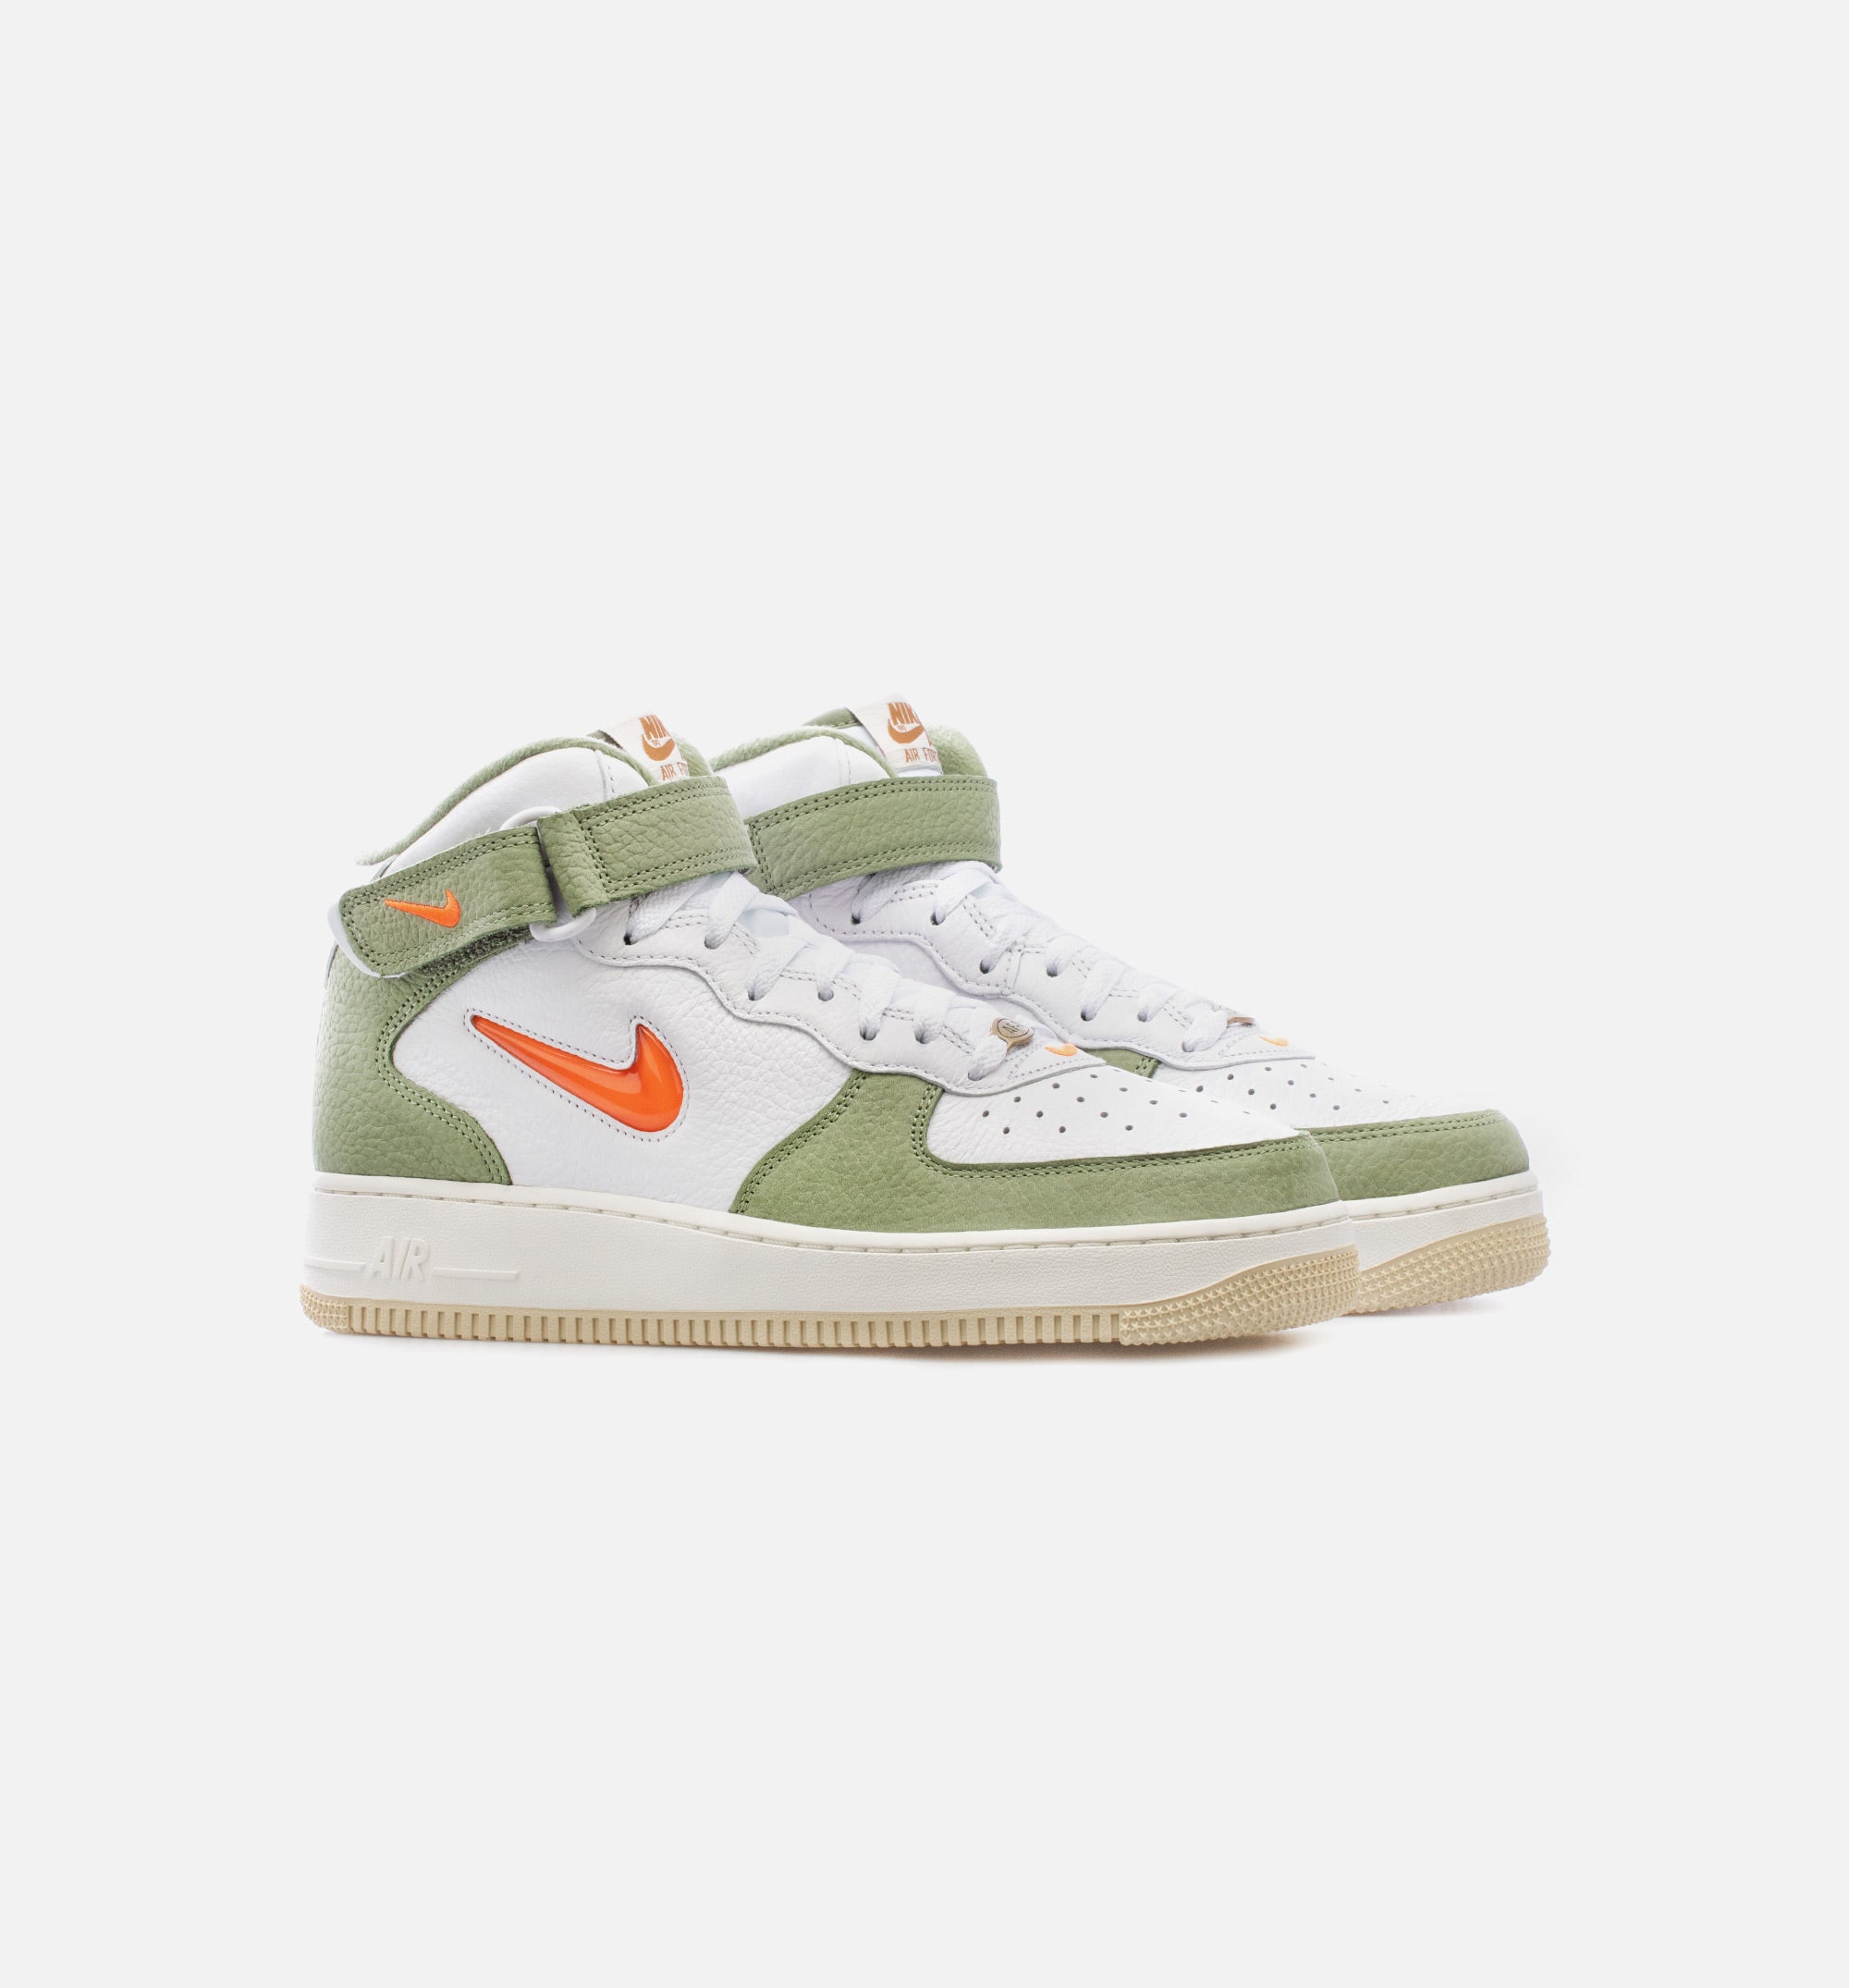 Nike Men's Air Force 1 Mid '07 LV8 Shoes